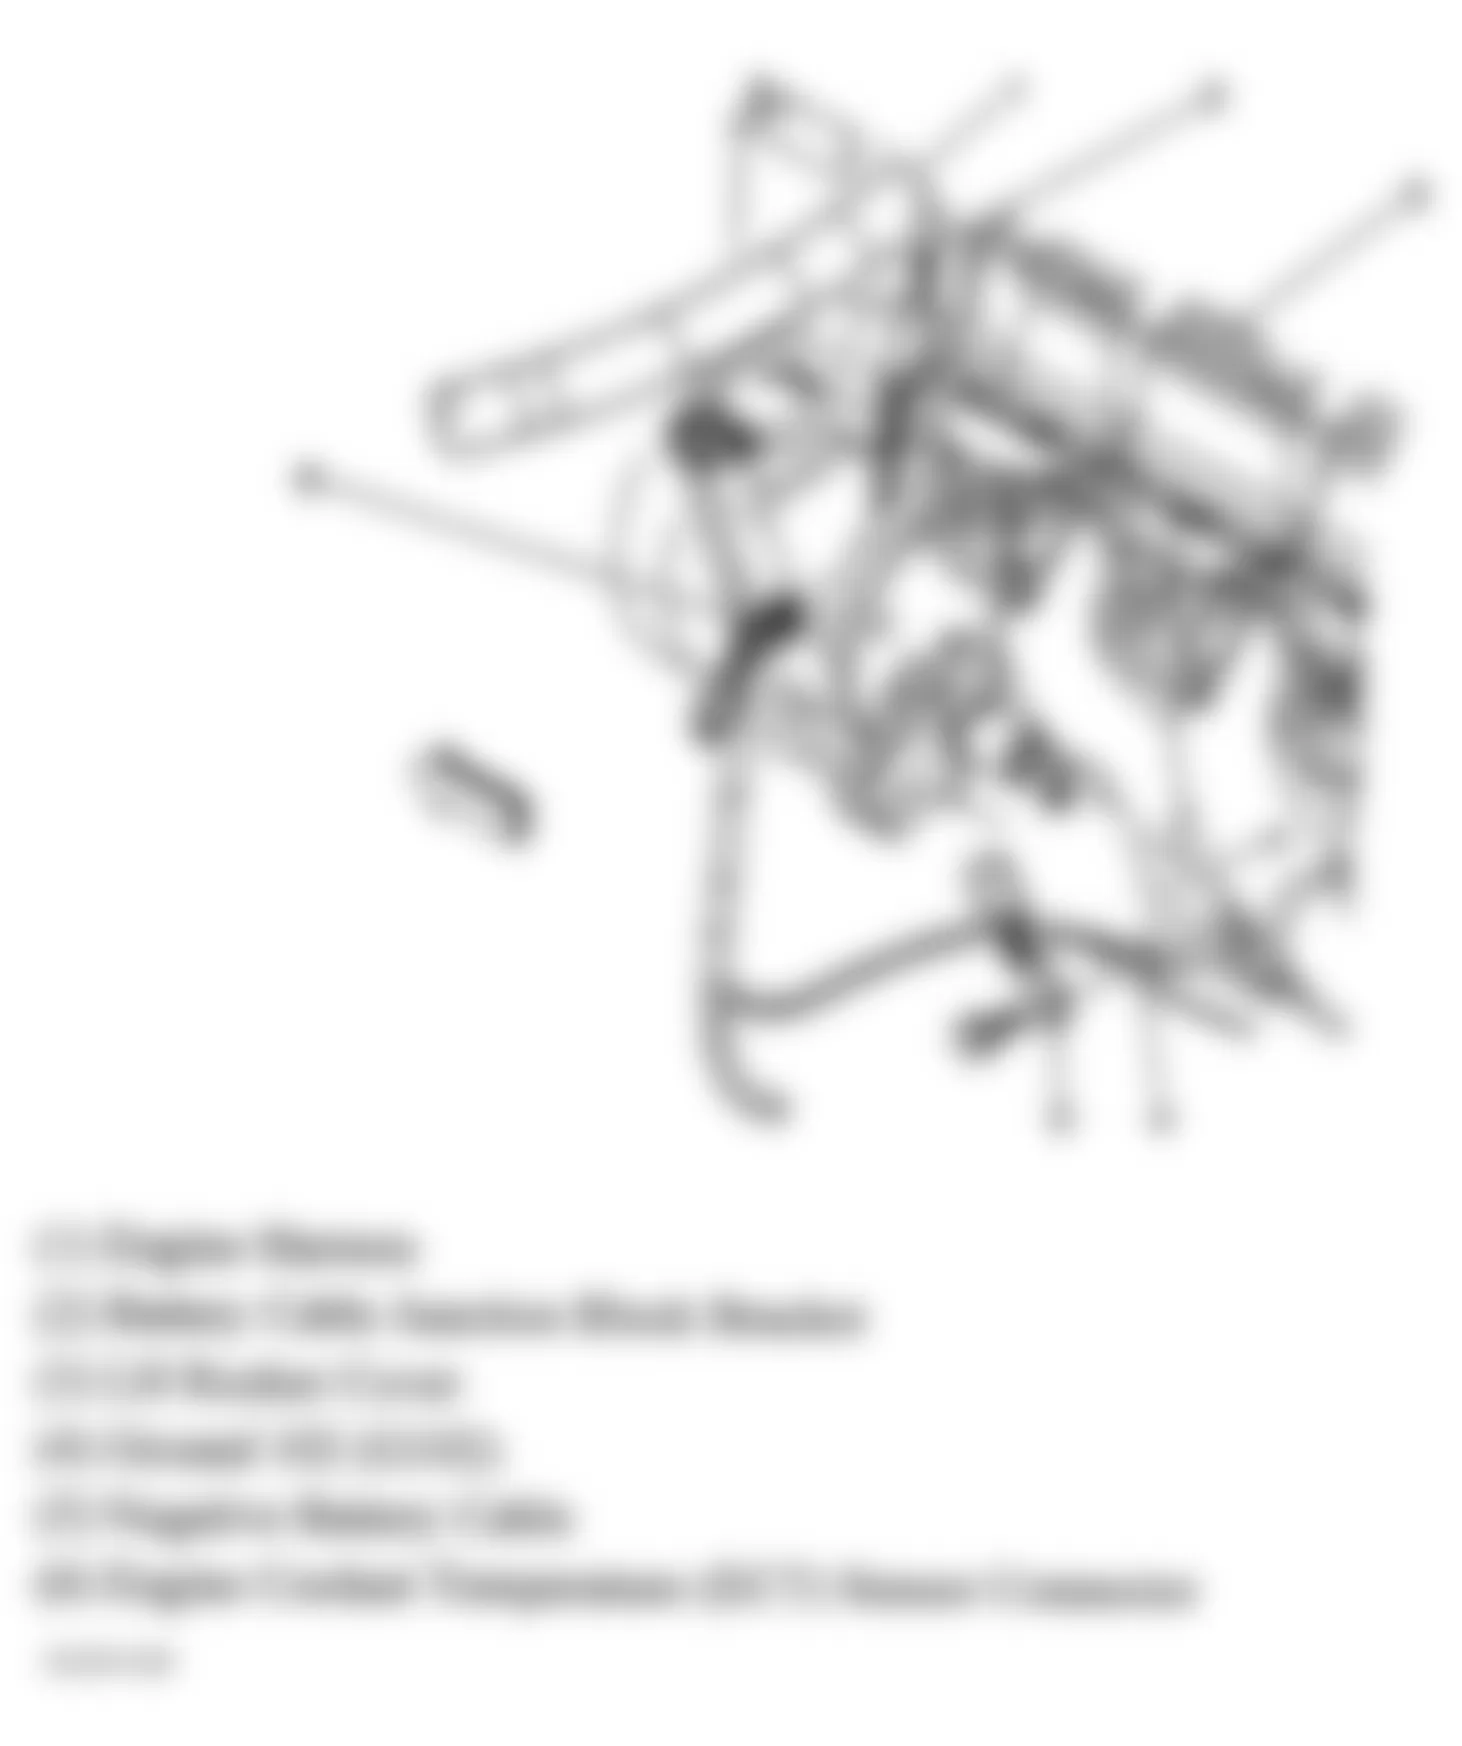 Chevrolet Avalanche 1500 2005 - Component Locations -  Lower Left Rear Of Engine (4.8L, 5.3L & 6.0L)